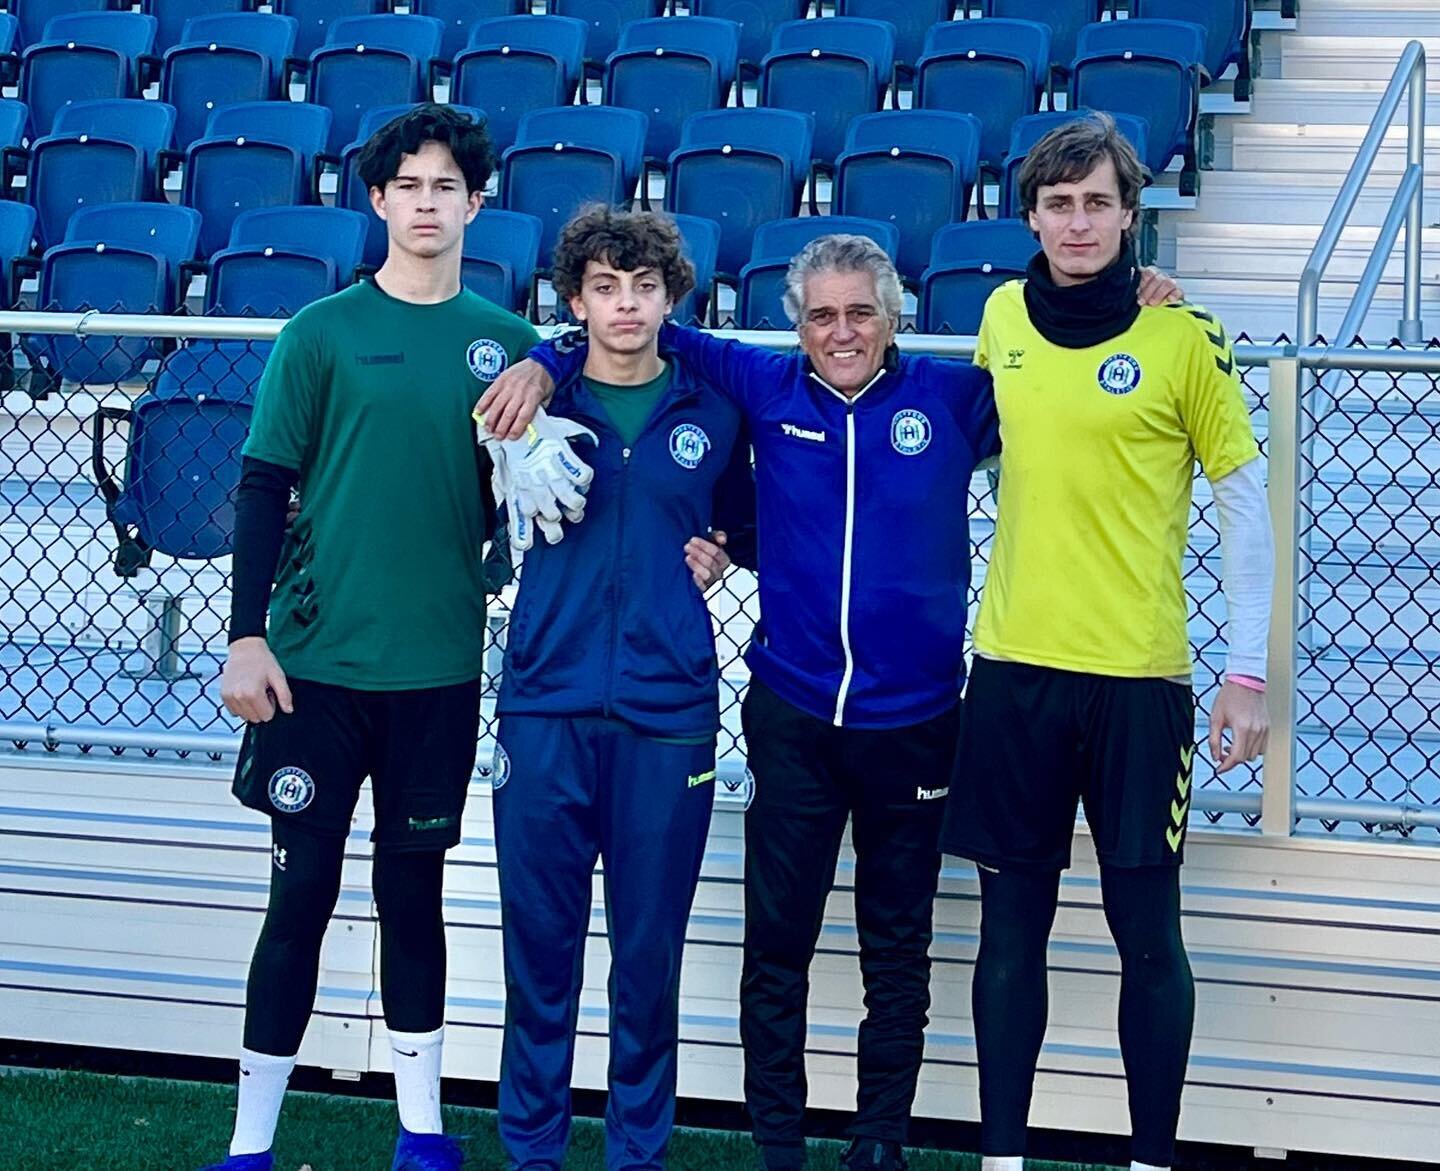 Enjoyed training Sebby, Will and Mason Hartford Athletic Academy keepers today! Good luck in the PDA tournament this weekend.